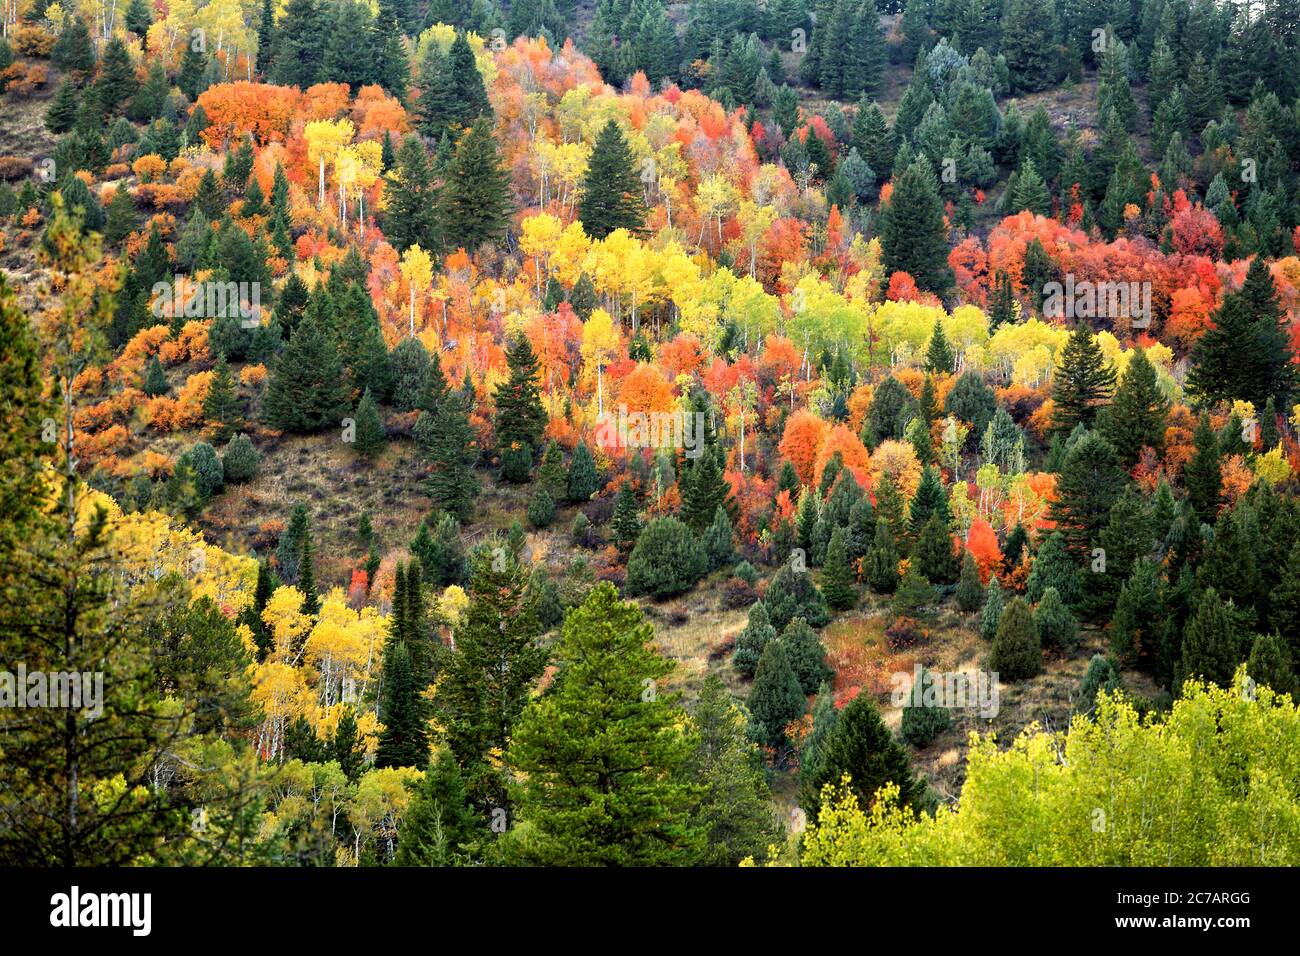 Vibrant autumn colors in s stand of Aspen trees in the mountains of  Idaho. Stock Photo